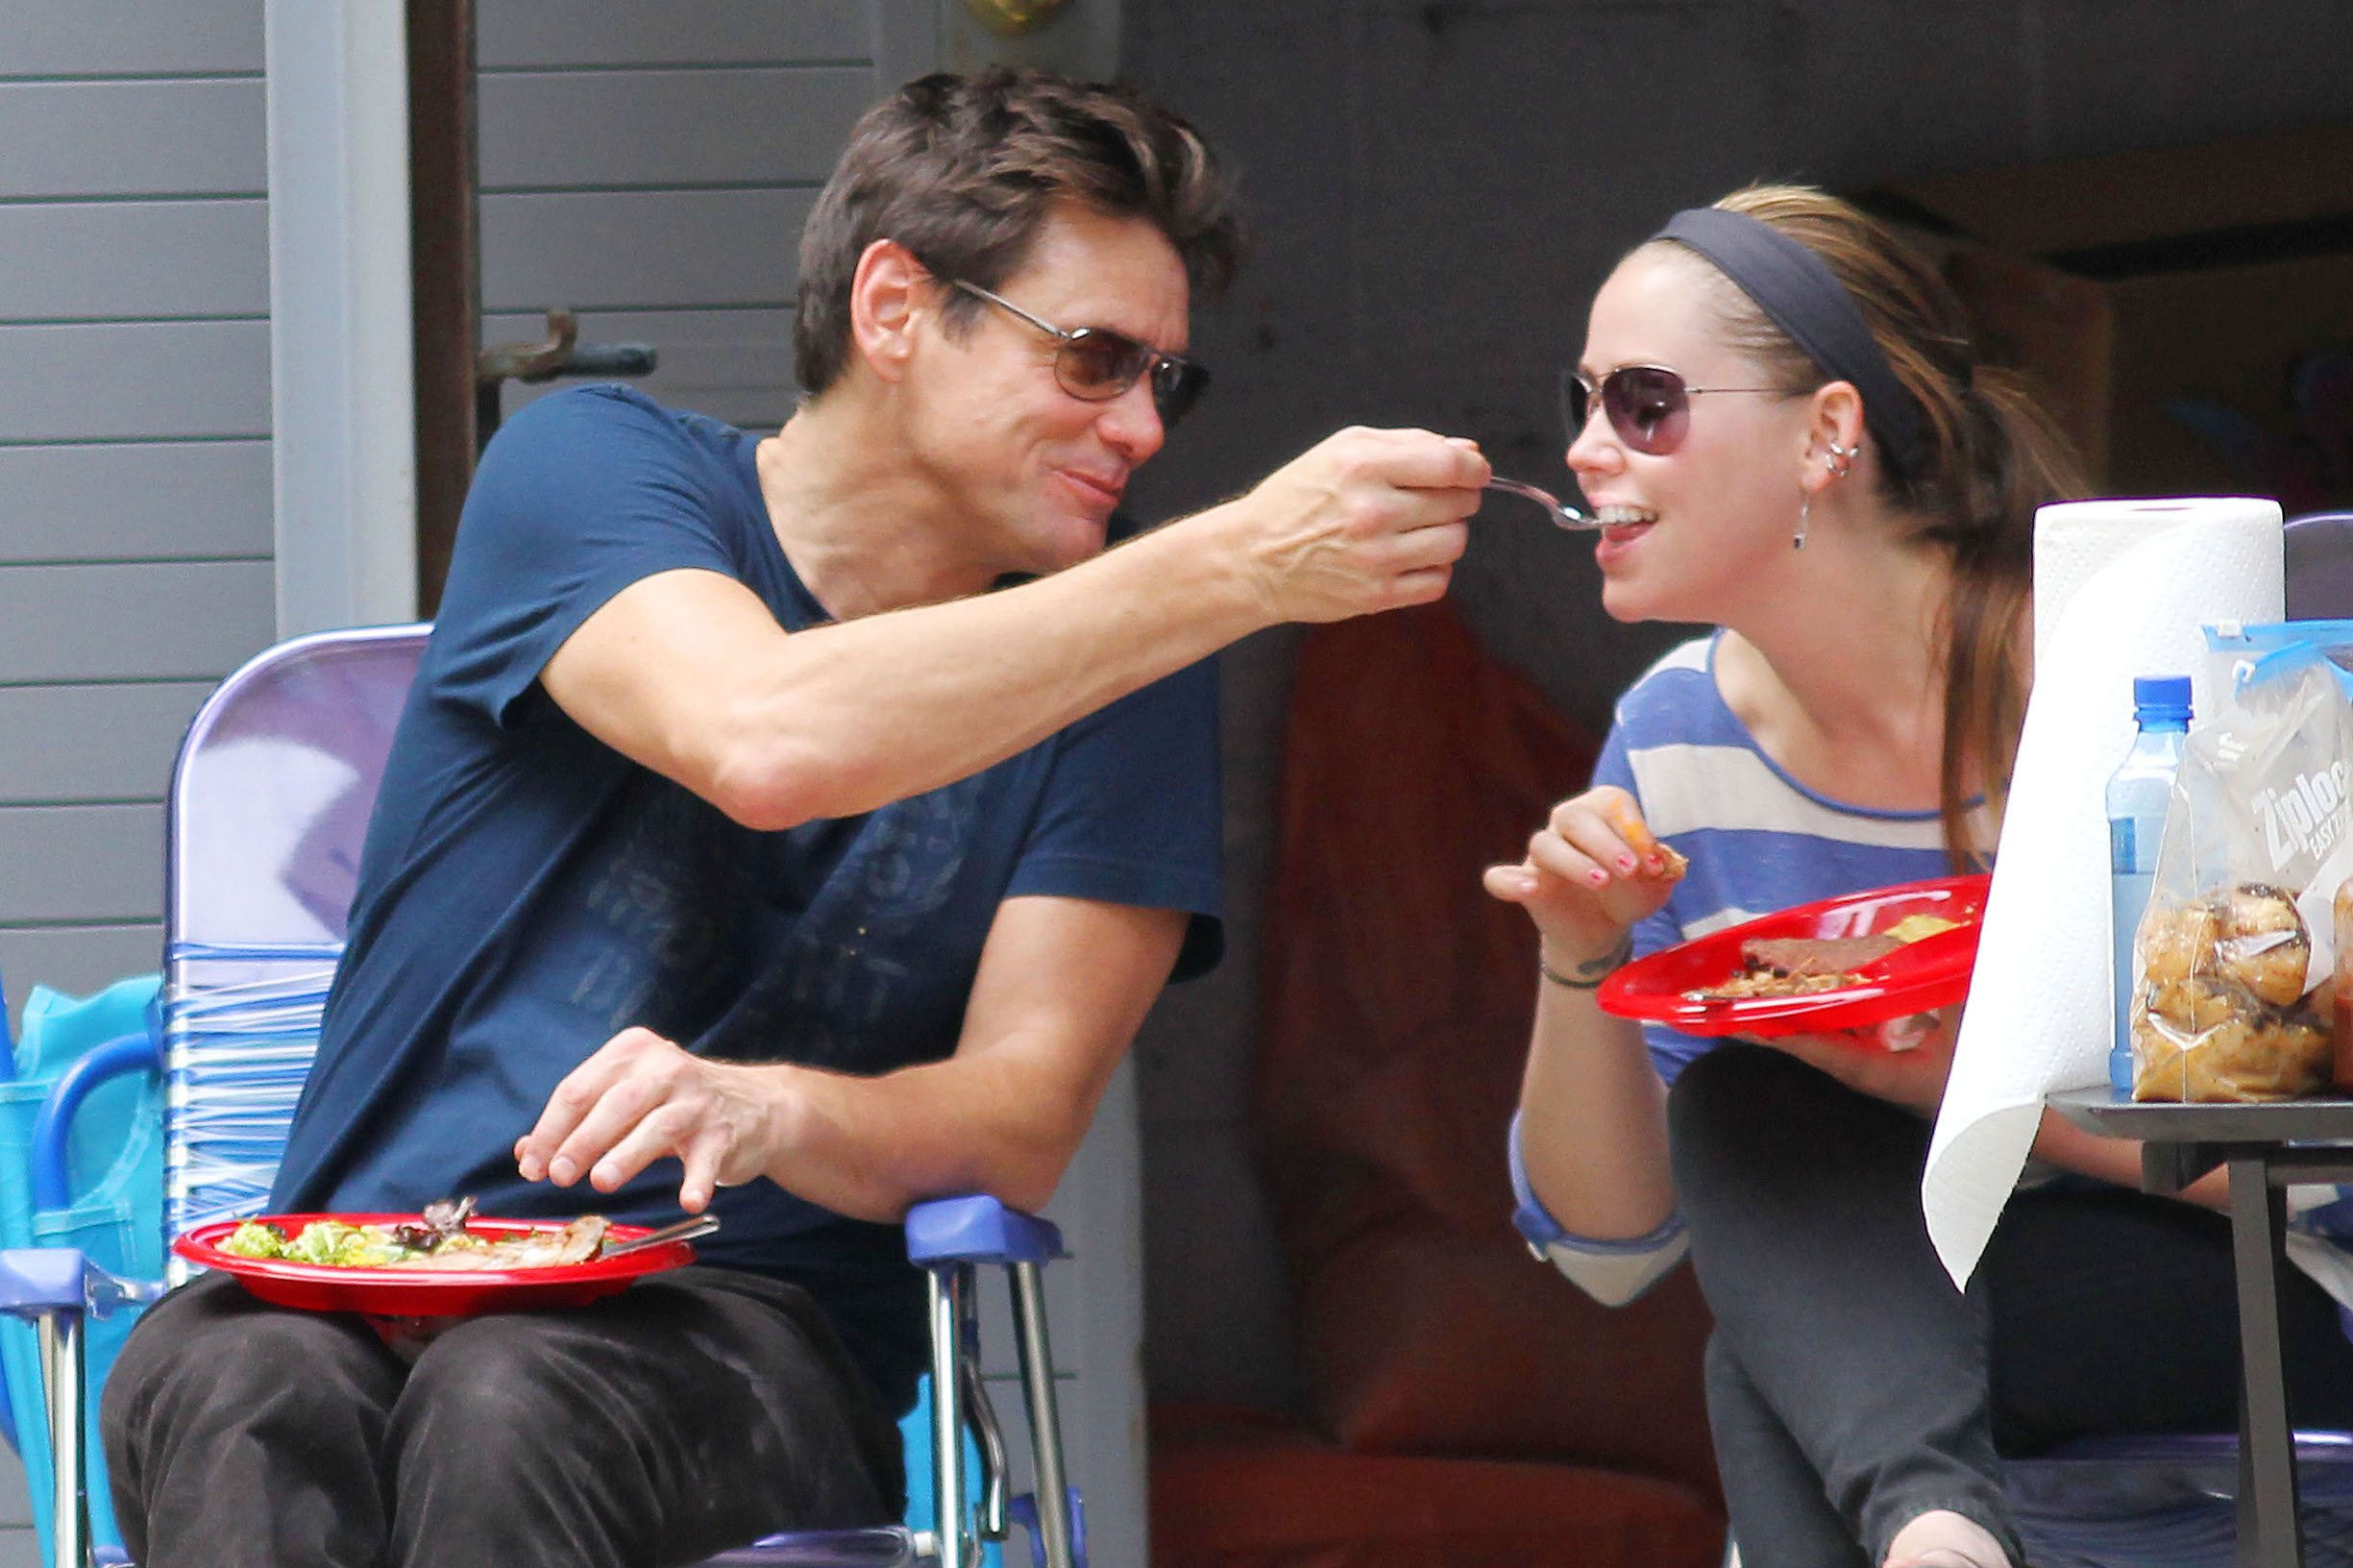 -New York, NY 09/05/11- Jim Carrey Celebrates Labor Day with Daughter Jane and friends out side of his apartment in NYC
-PICTURED: Jim Carrey with daughter Jane
-,Image: 102052134, License: Rights-managed, Restrictions: , Model Release: no, Credit line: FREDDIE BAEZ / INSTAR Images / Profimedia